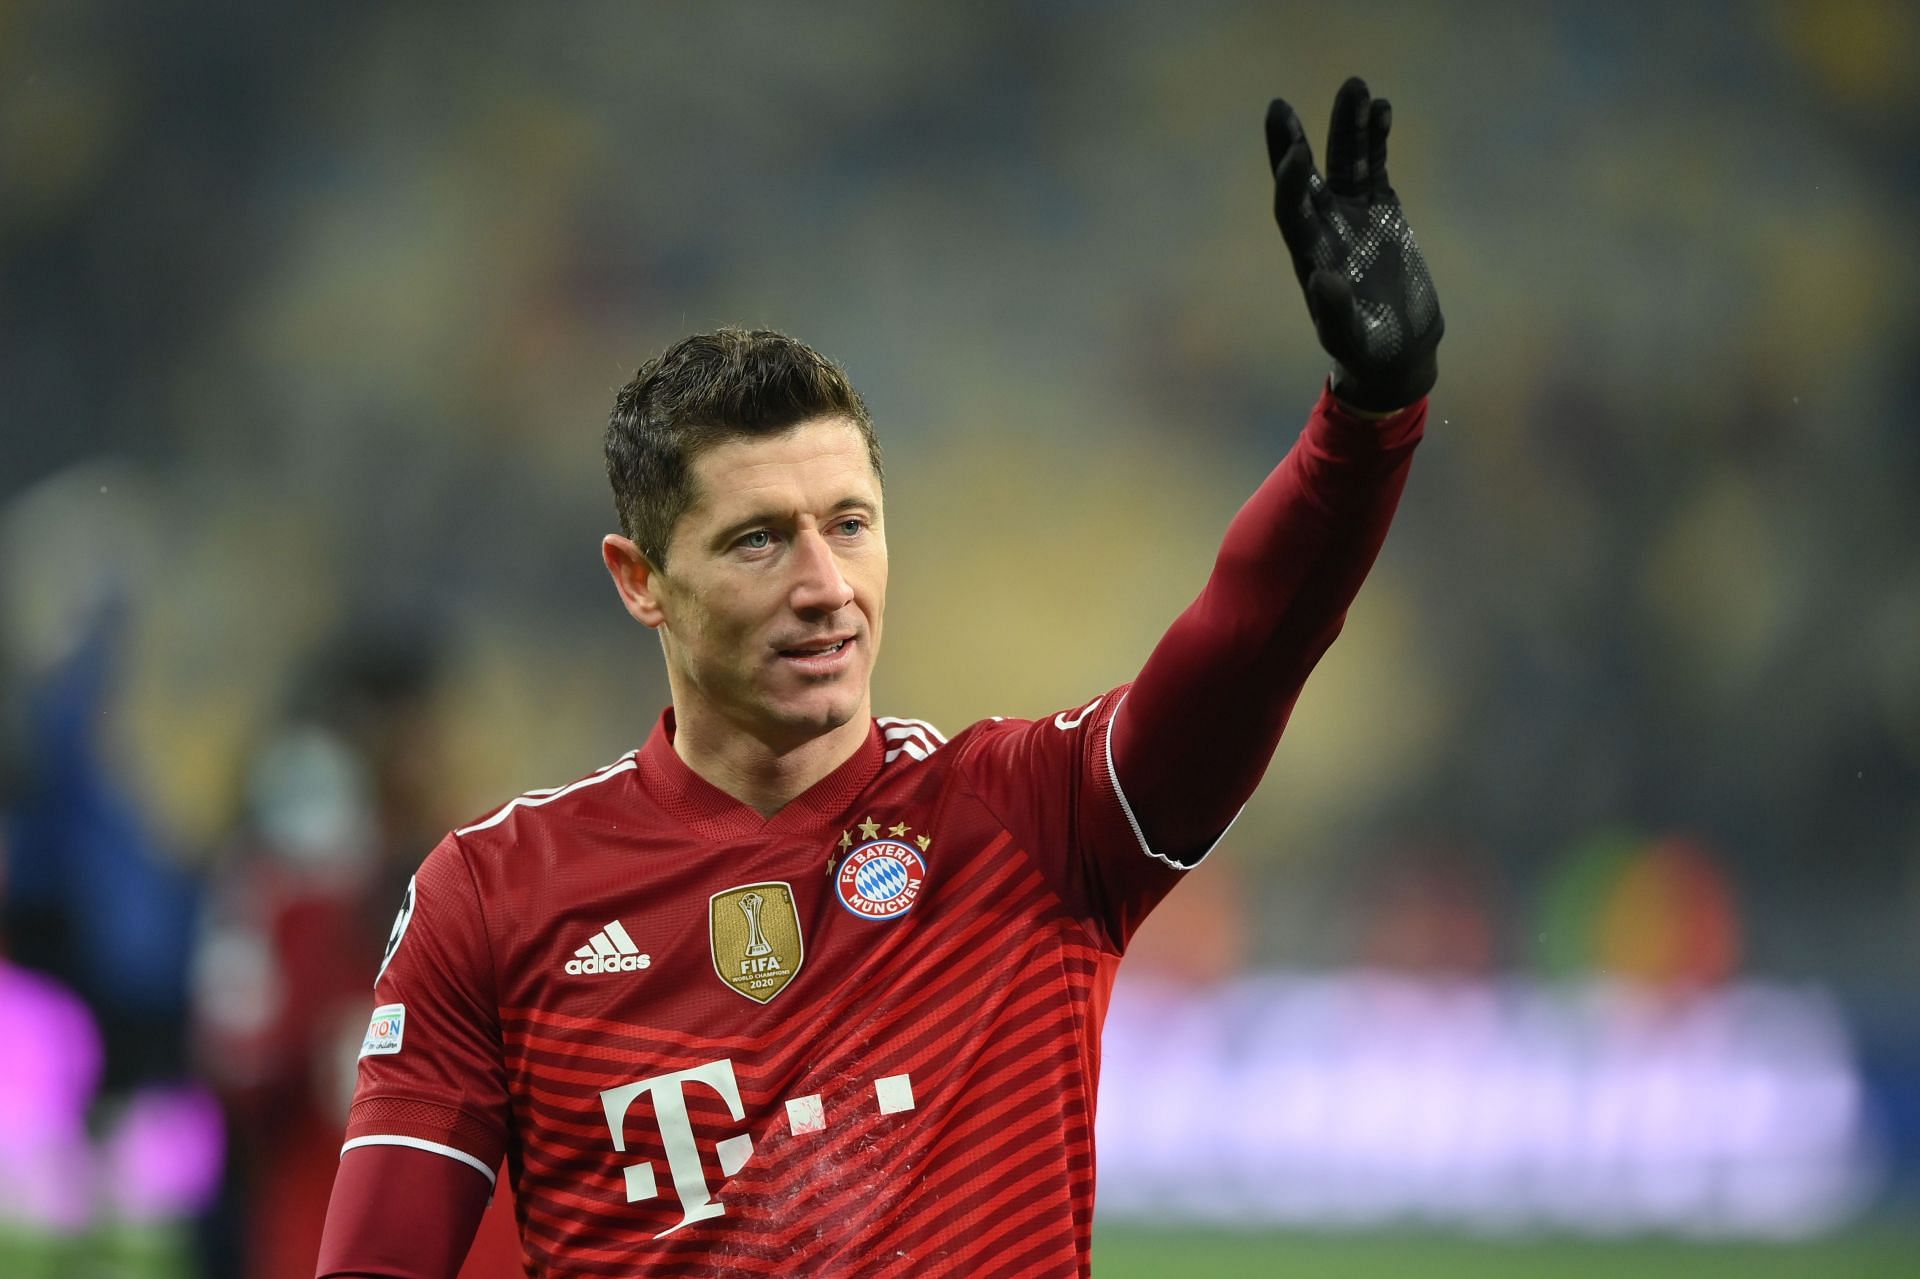 Lewandowski was once again on target in the Champions League